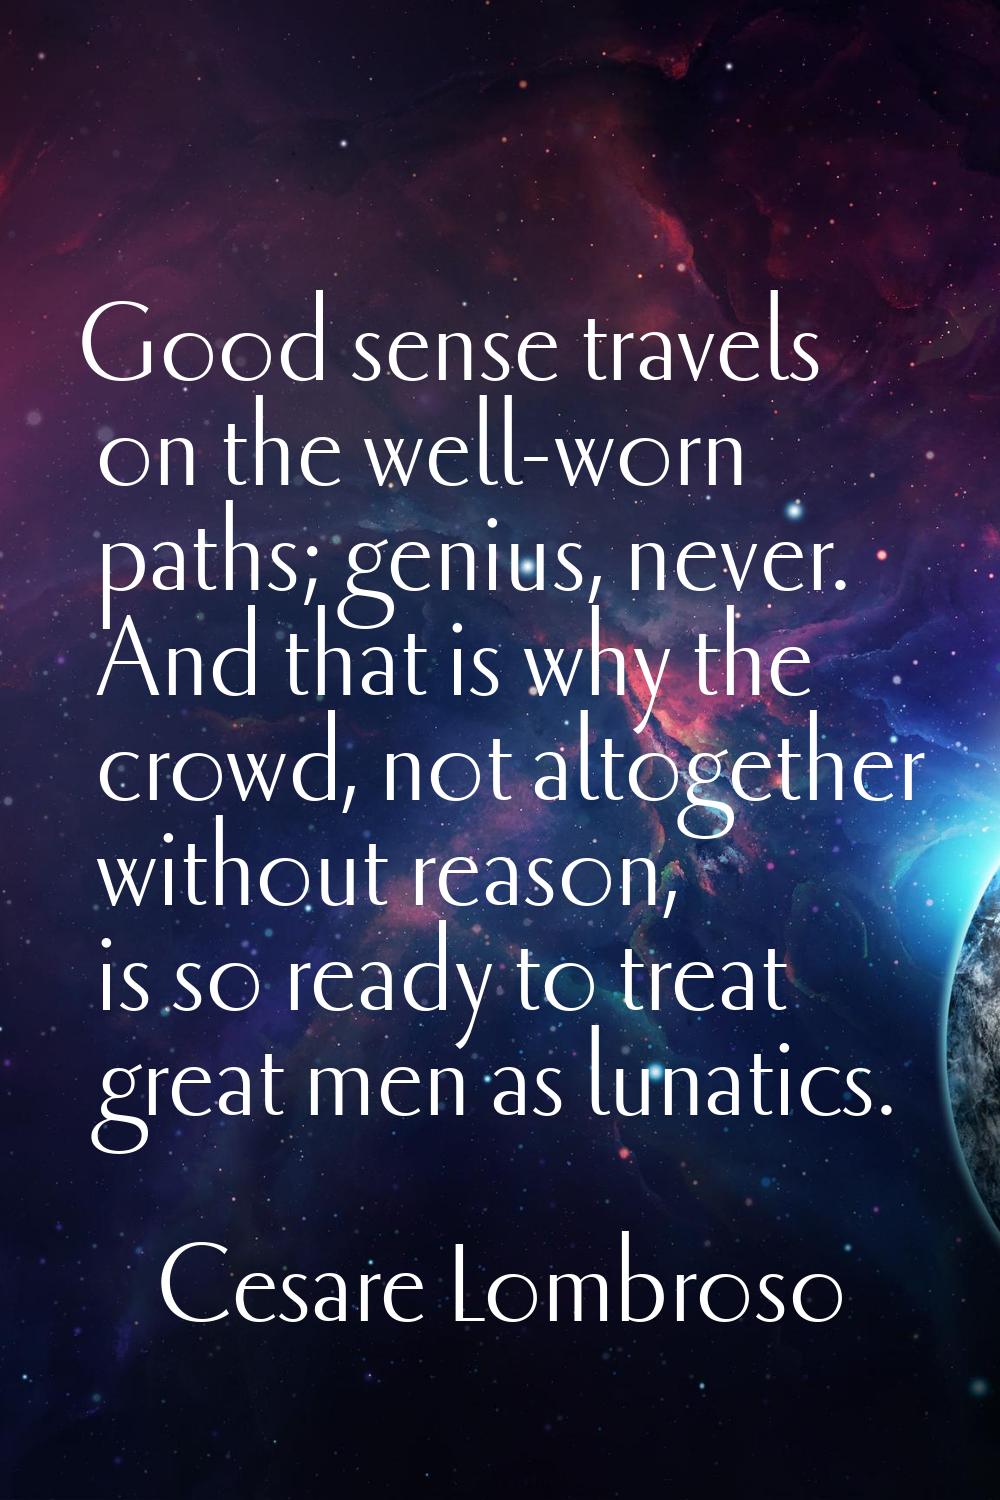 Good sense travels on the well-worn paths; genius, never. And that is why the crowd, not altogether